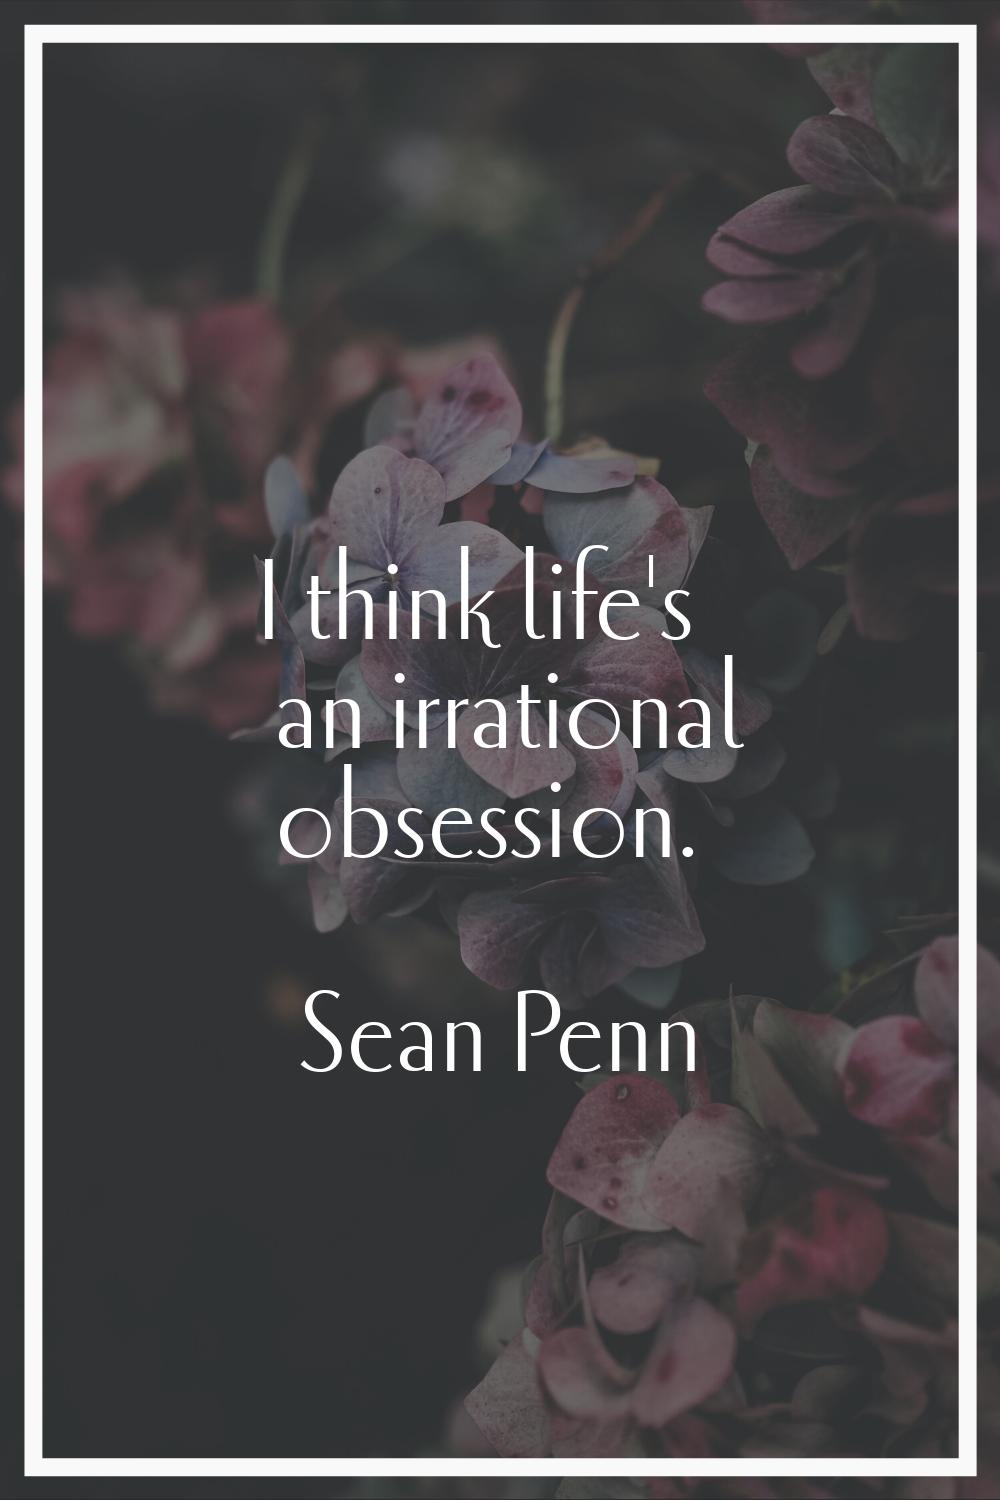 I think life's an irrational obsession.